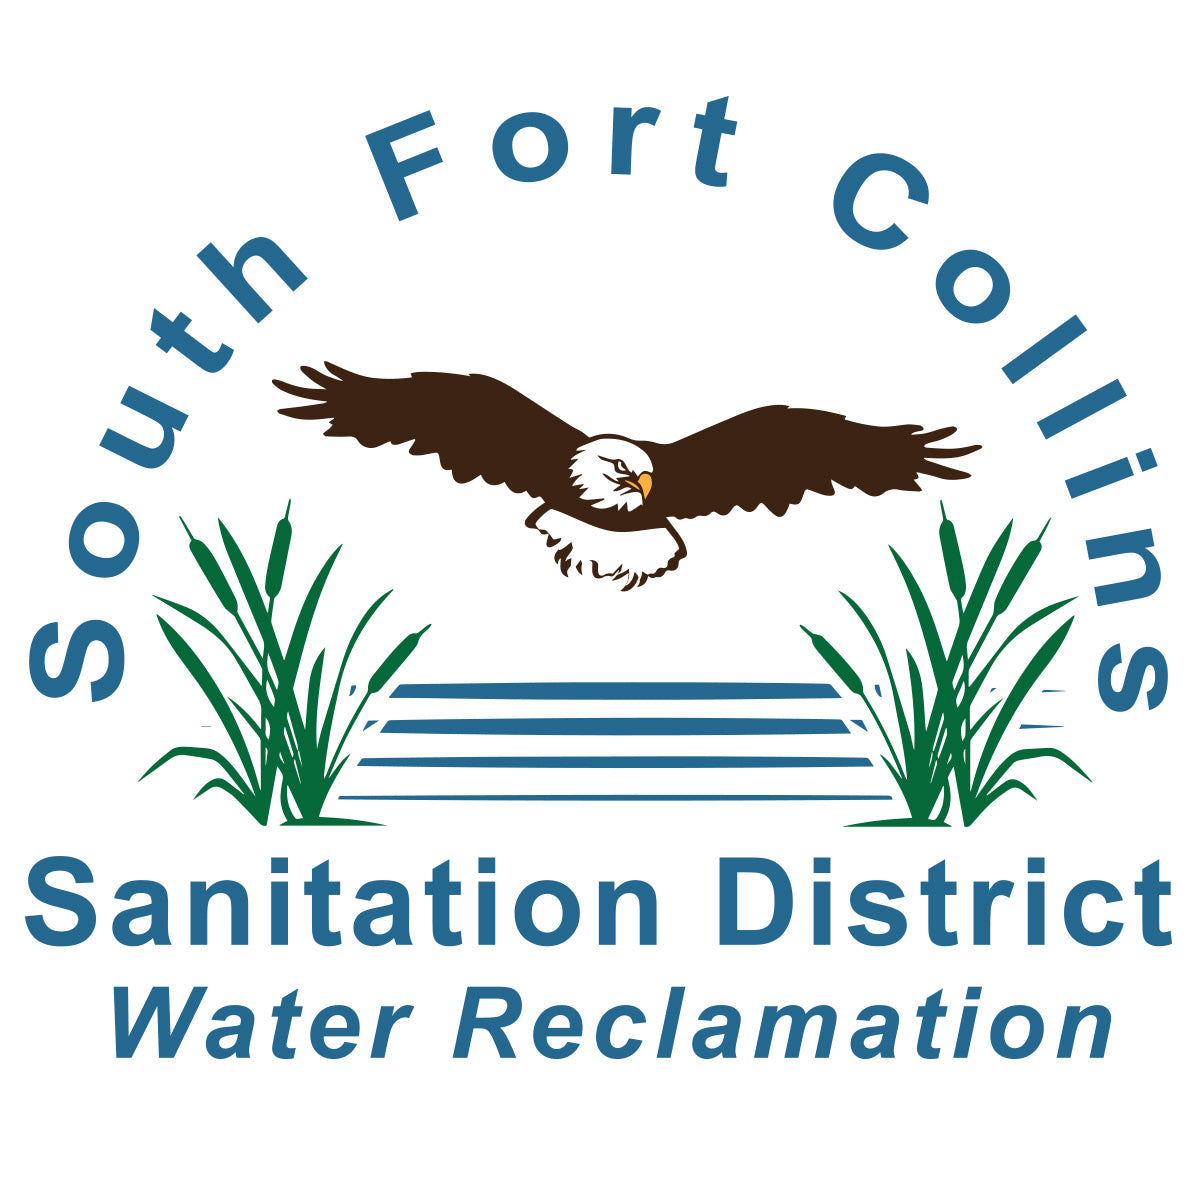 South Fort Collins Sanitation District - BSS